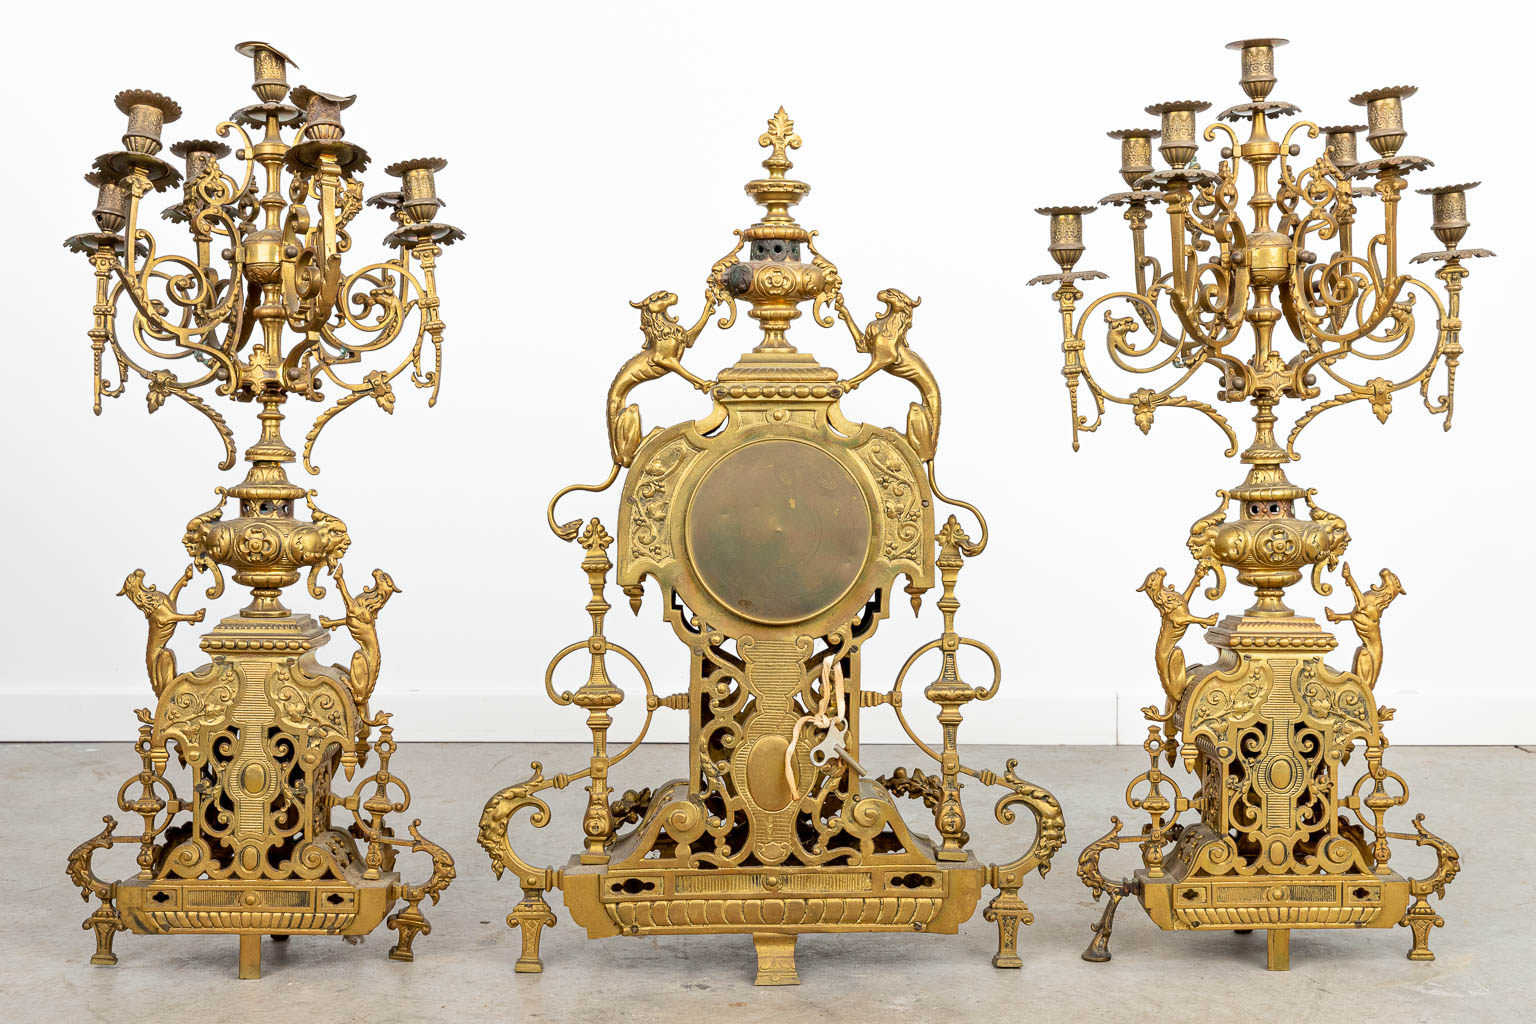 A three-piece mantle clock made of a bronze clock with candelabra. (H:70cm)